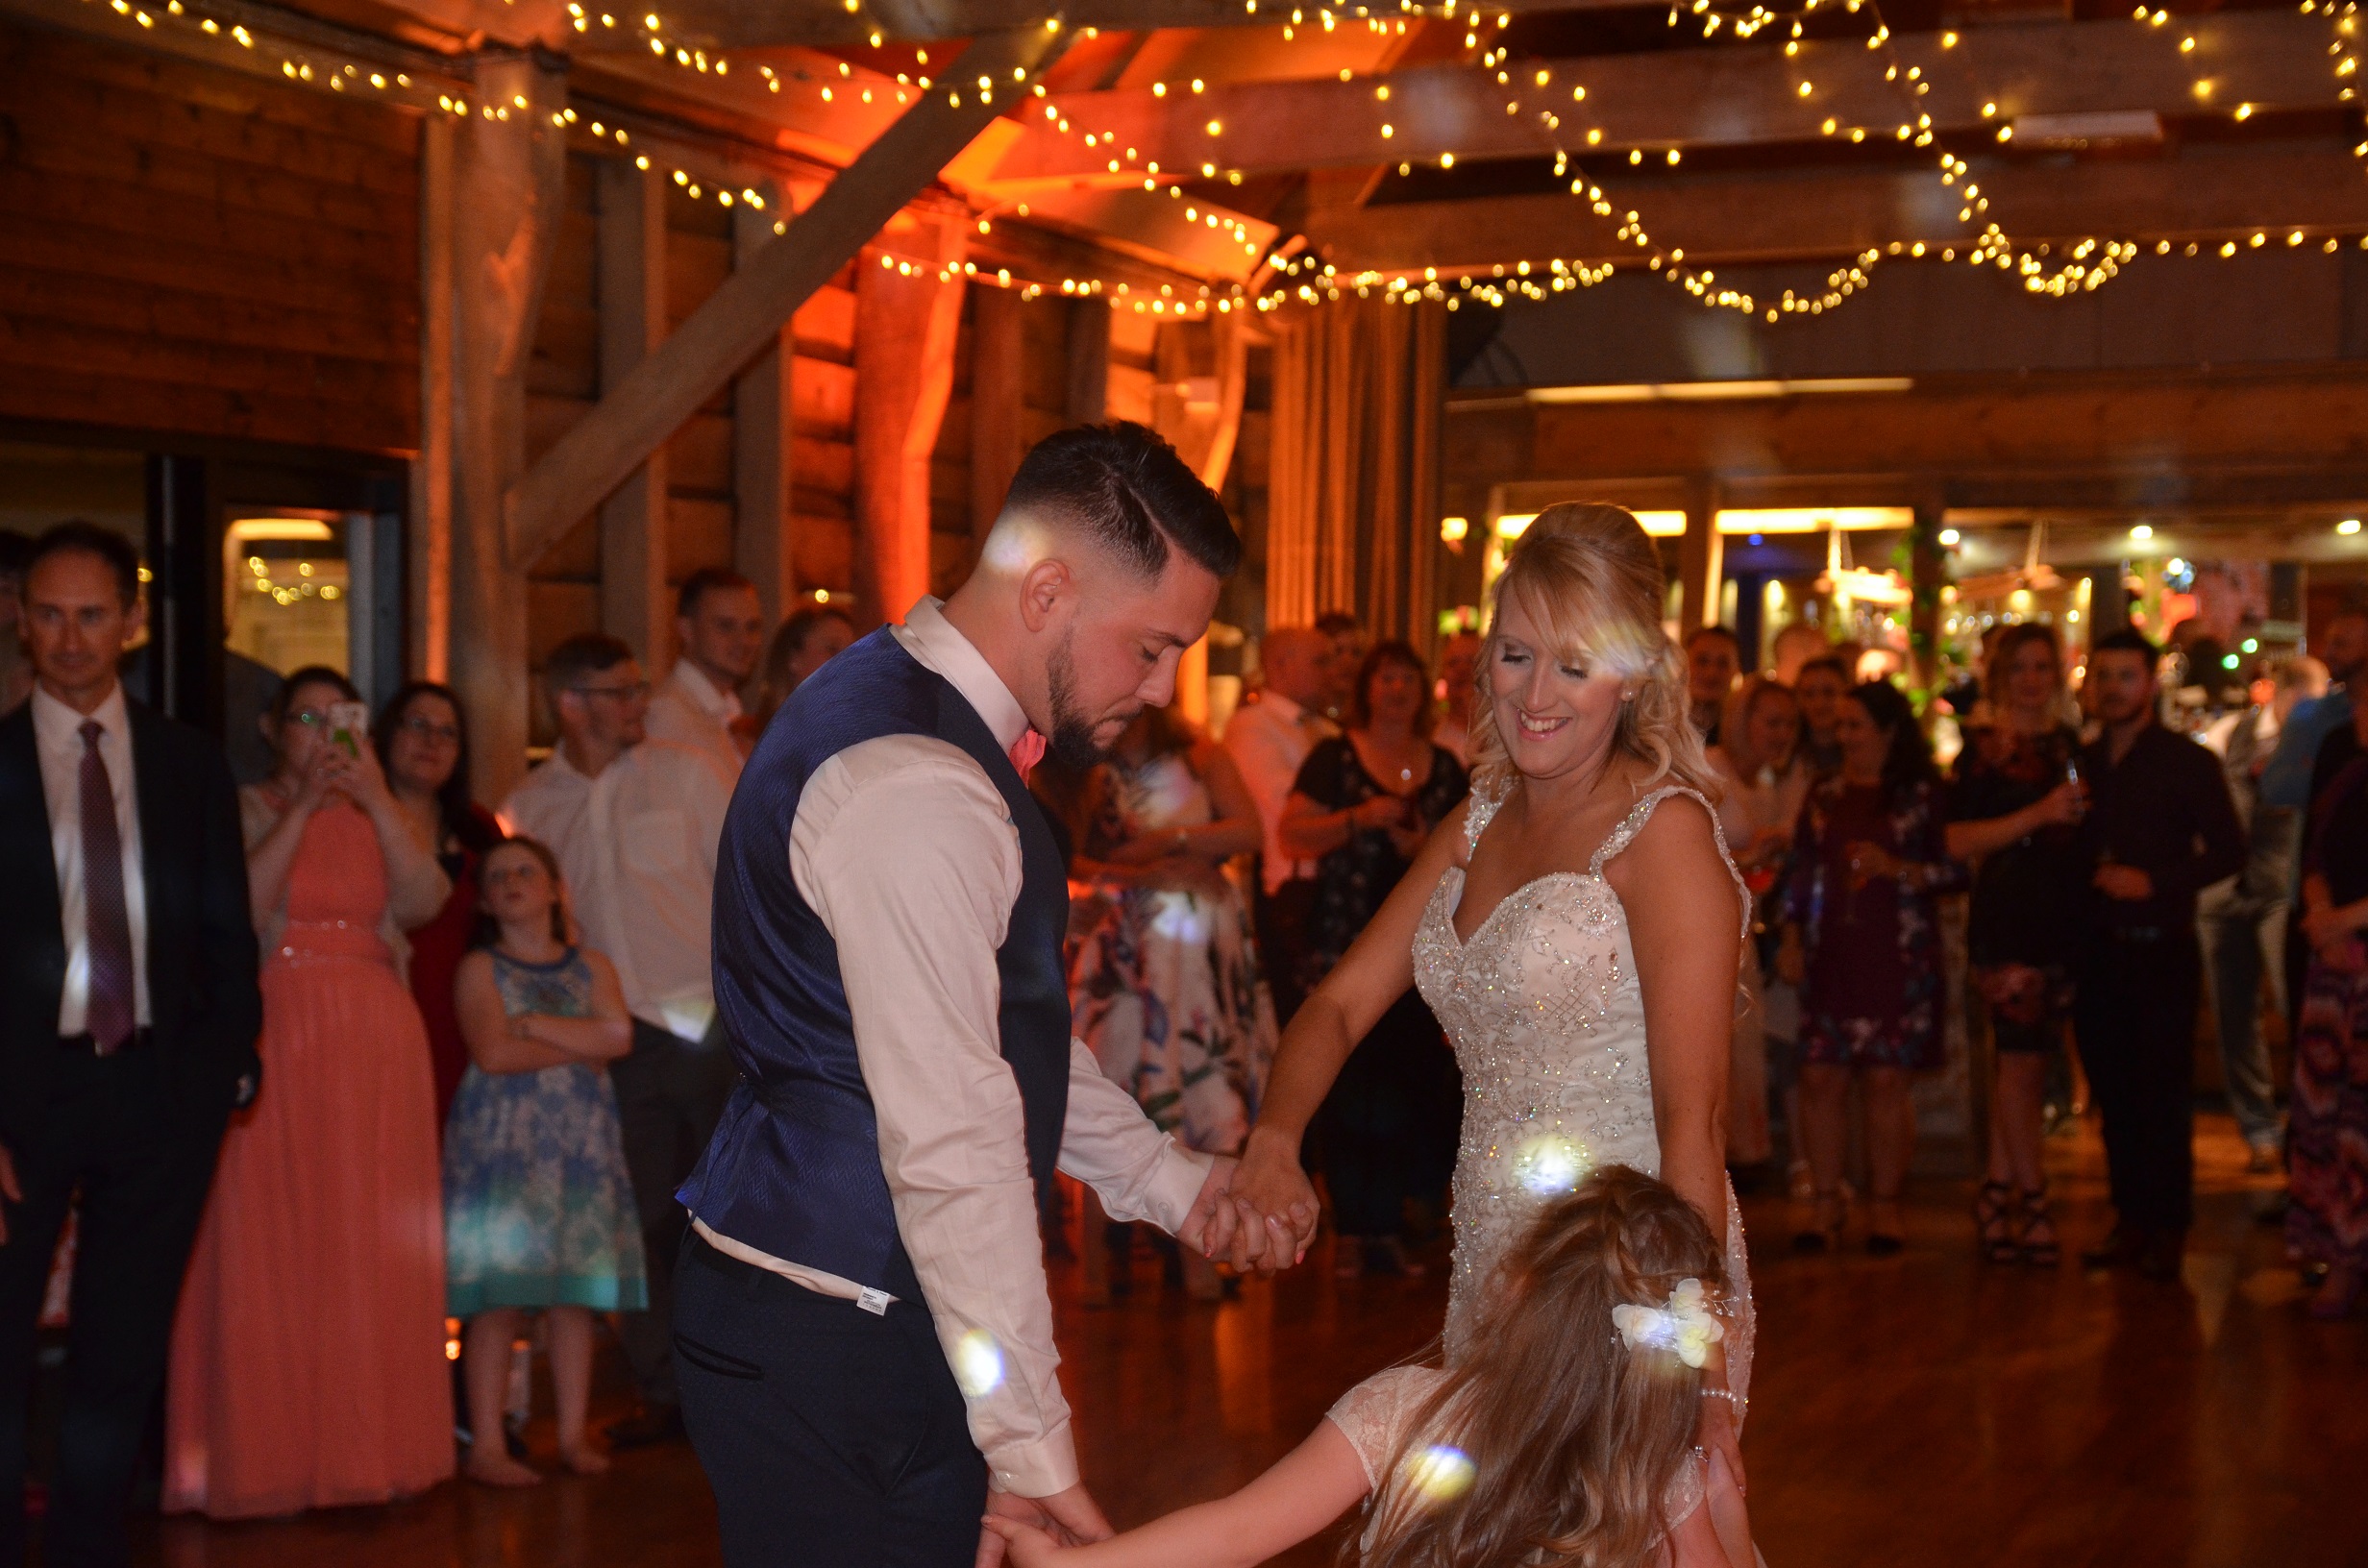 Whitewed Directory from the professionals blog first dance song top ten songs vetted and approved DJ's family dancing wedding reception